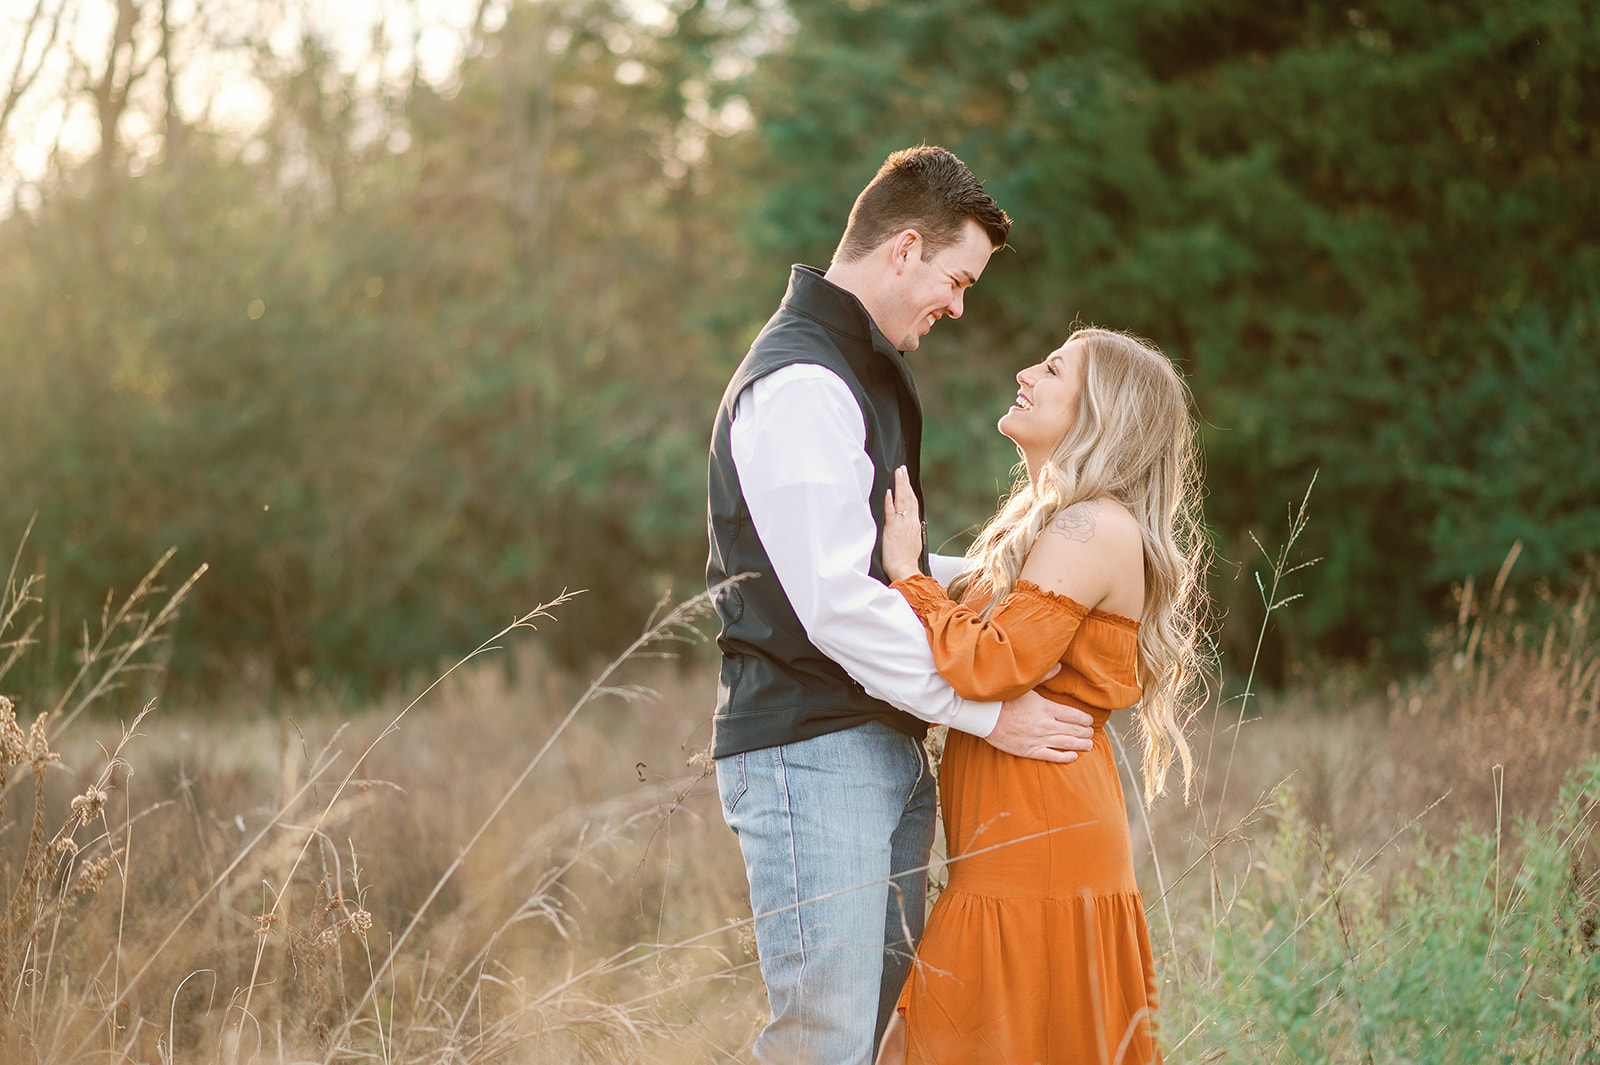 DFW Engagement Session with Photography by Candace Pair